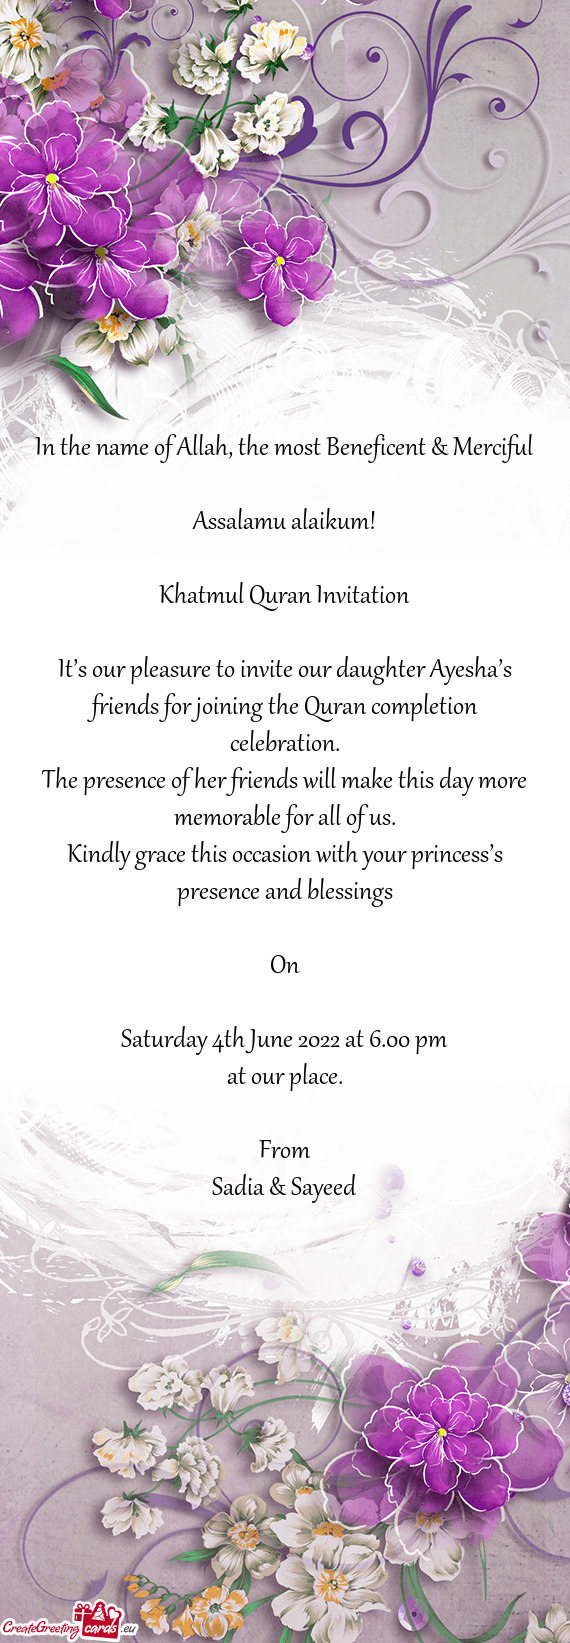 It’s our pleasure to invite our daughter Ayesha’s friends for joining the Quran completion celeb